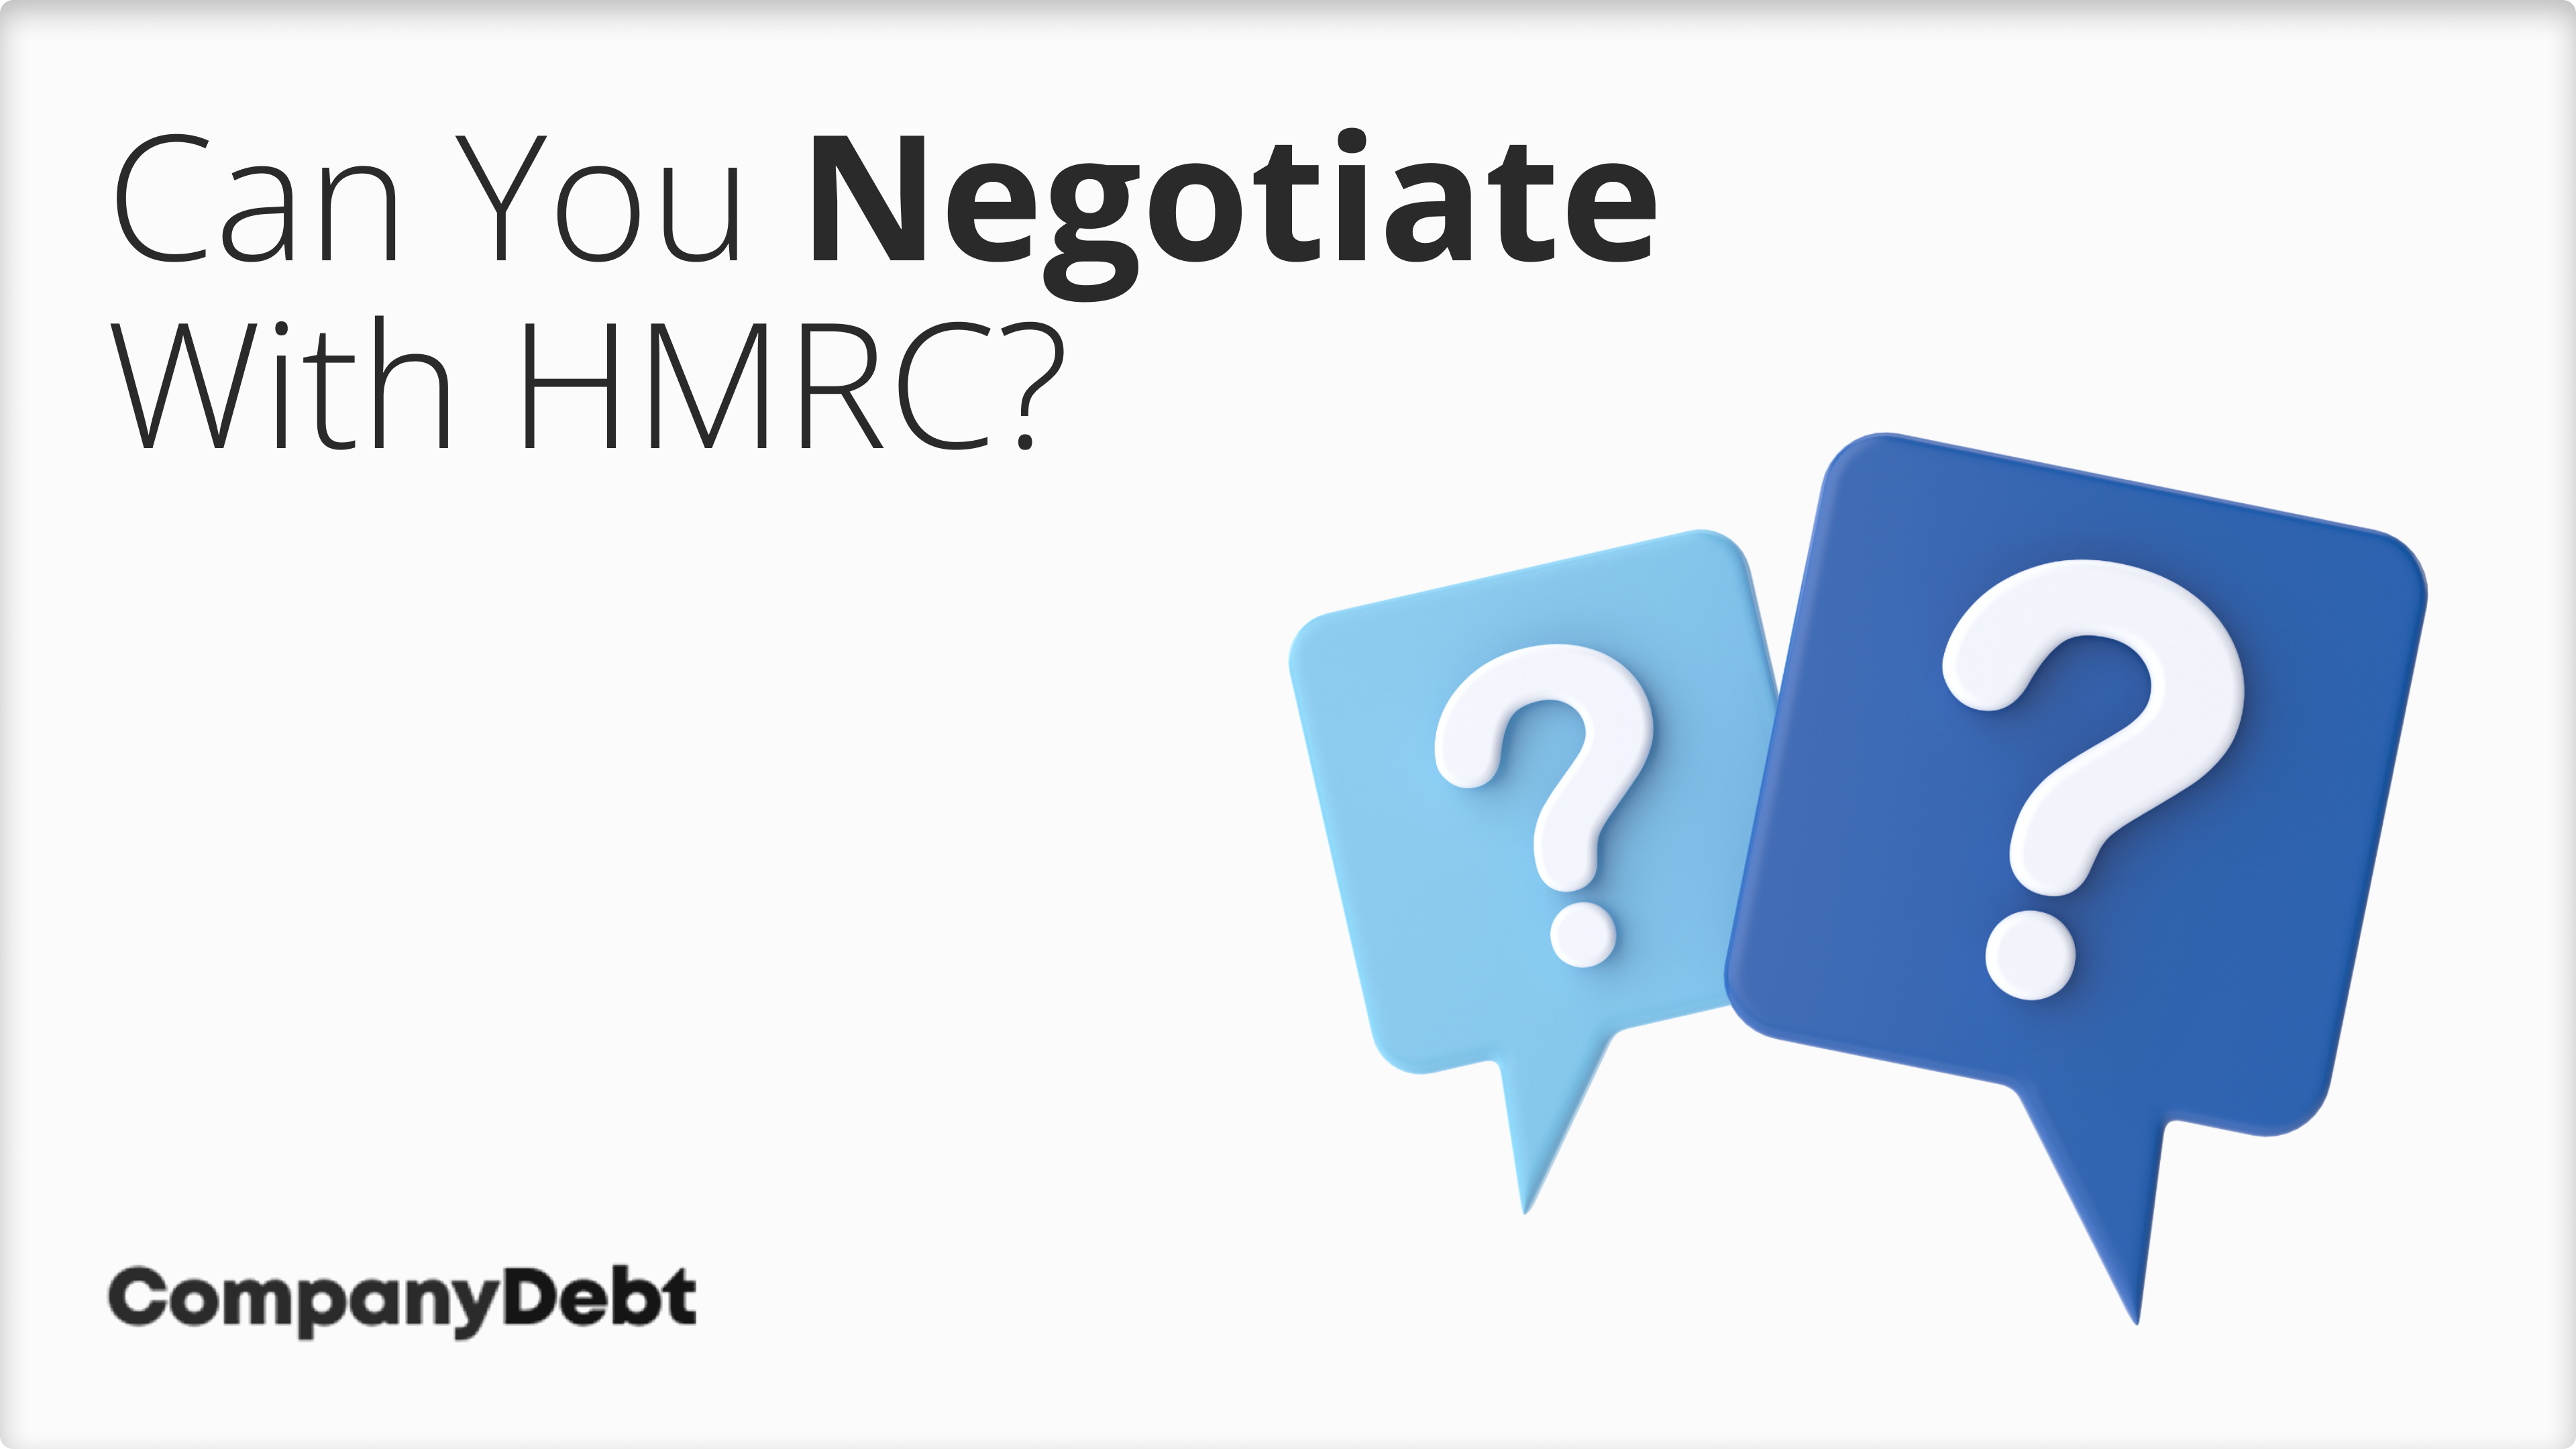 Can You Negotiate with HMRC?